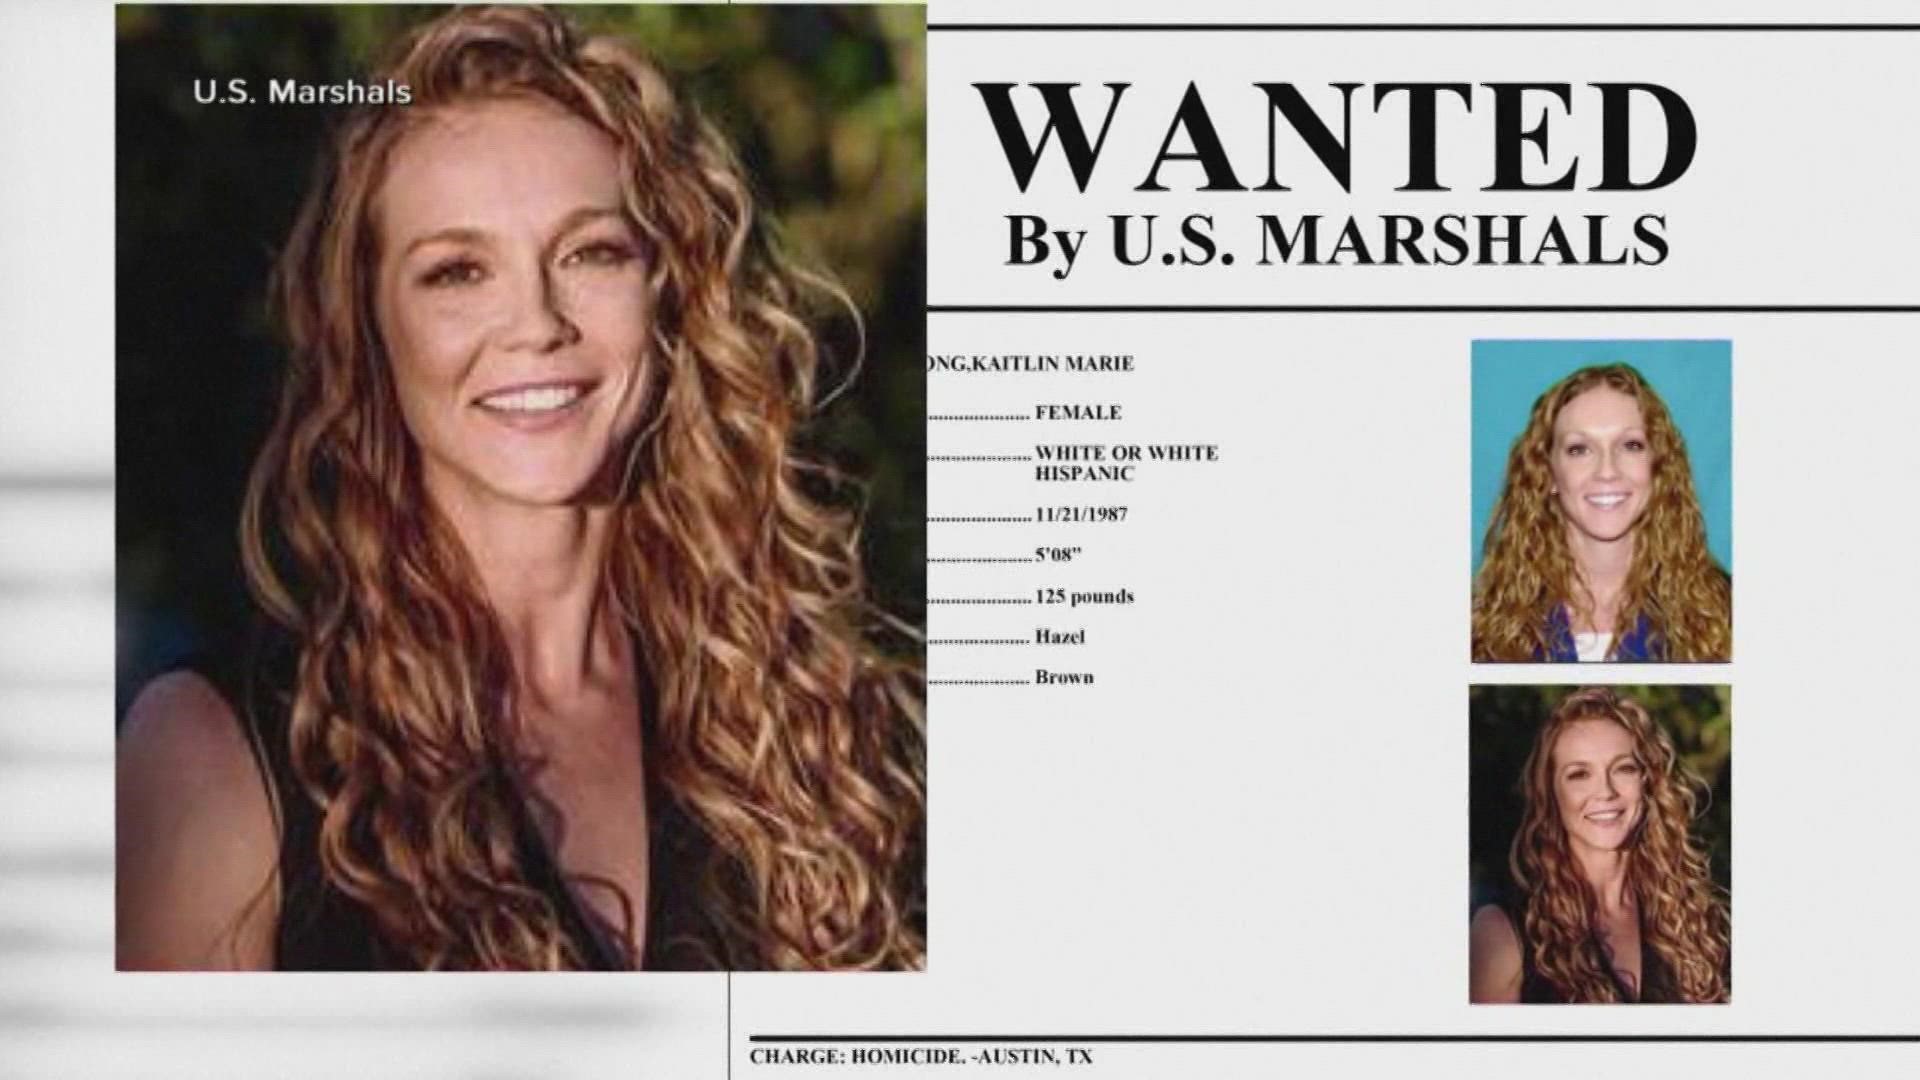 Kaitlin Marie Armstrong, the Austin, Texas woman suspected of killing rising cycling star Moriah Wilson in May, has been captured, the U.S. Marshals said.